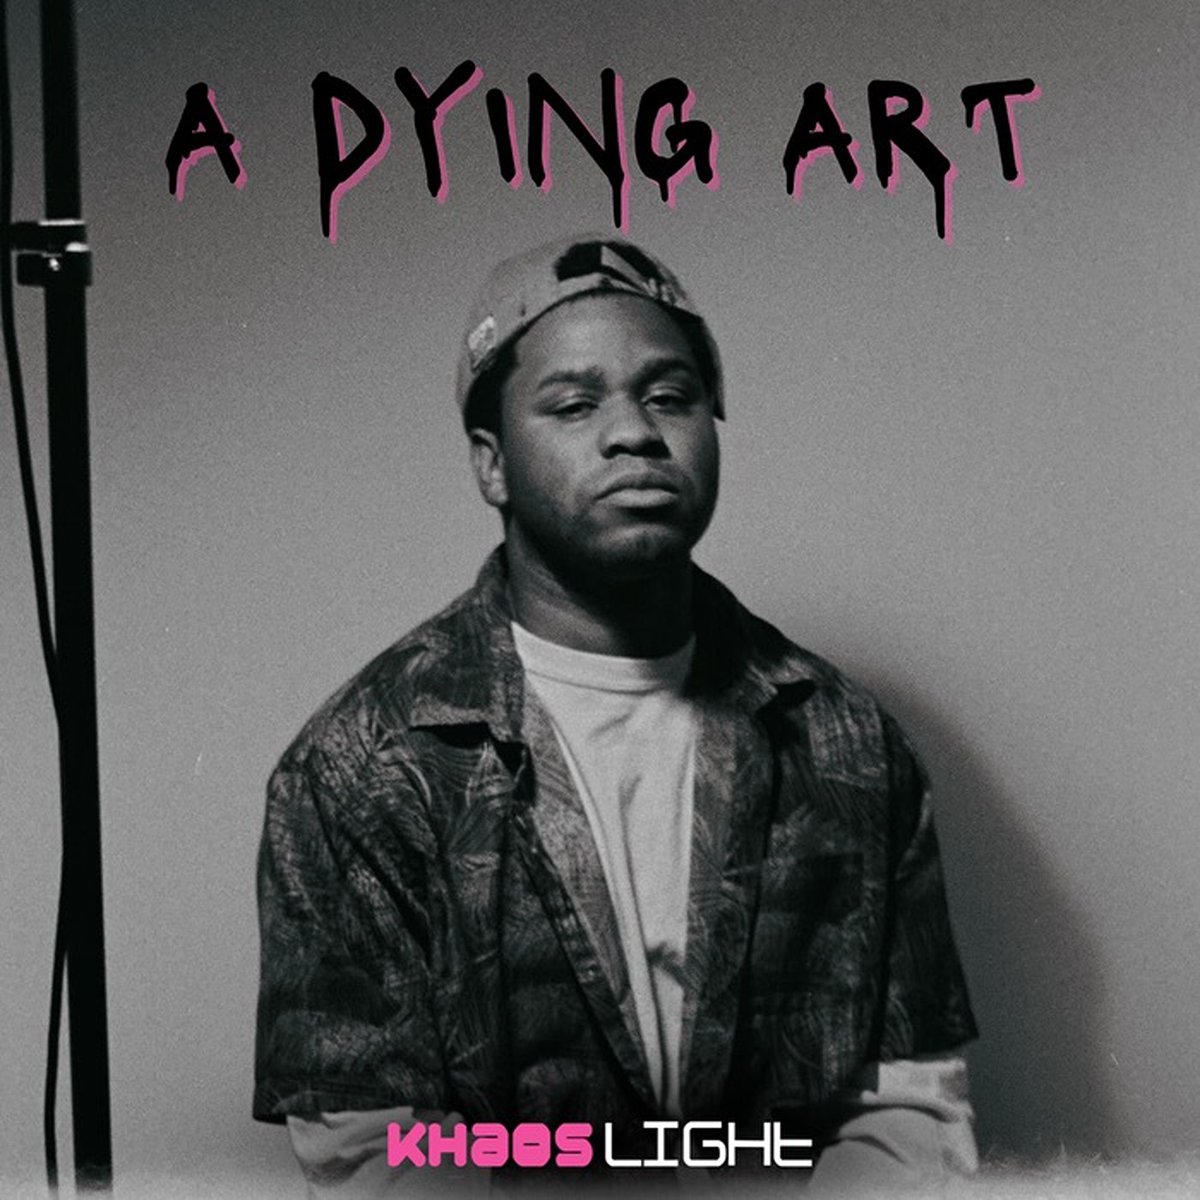 My Ep A Dying Art is out now! This ep is years in the making. I put my entire heart into this ep and there’s more music coming very soon :)